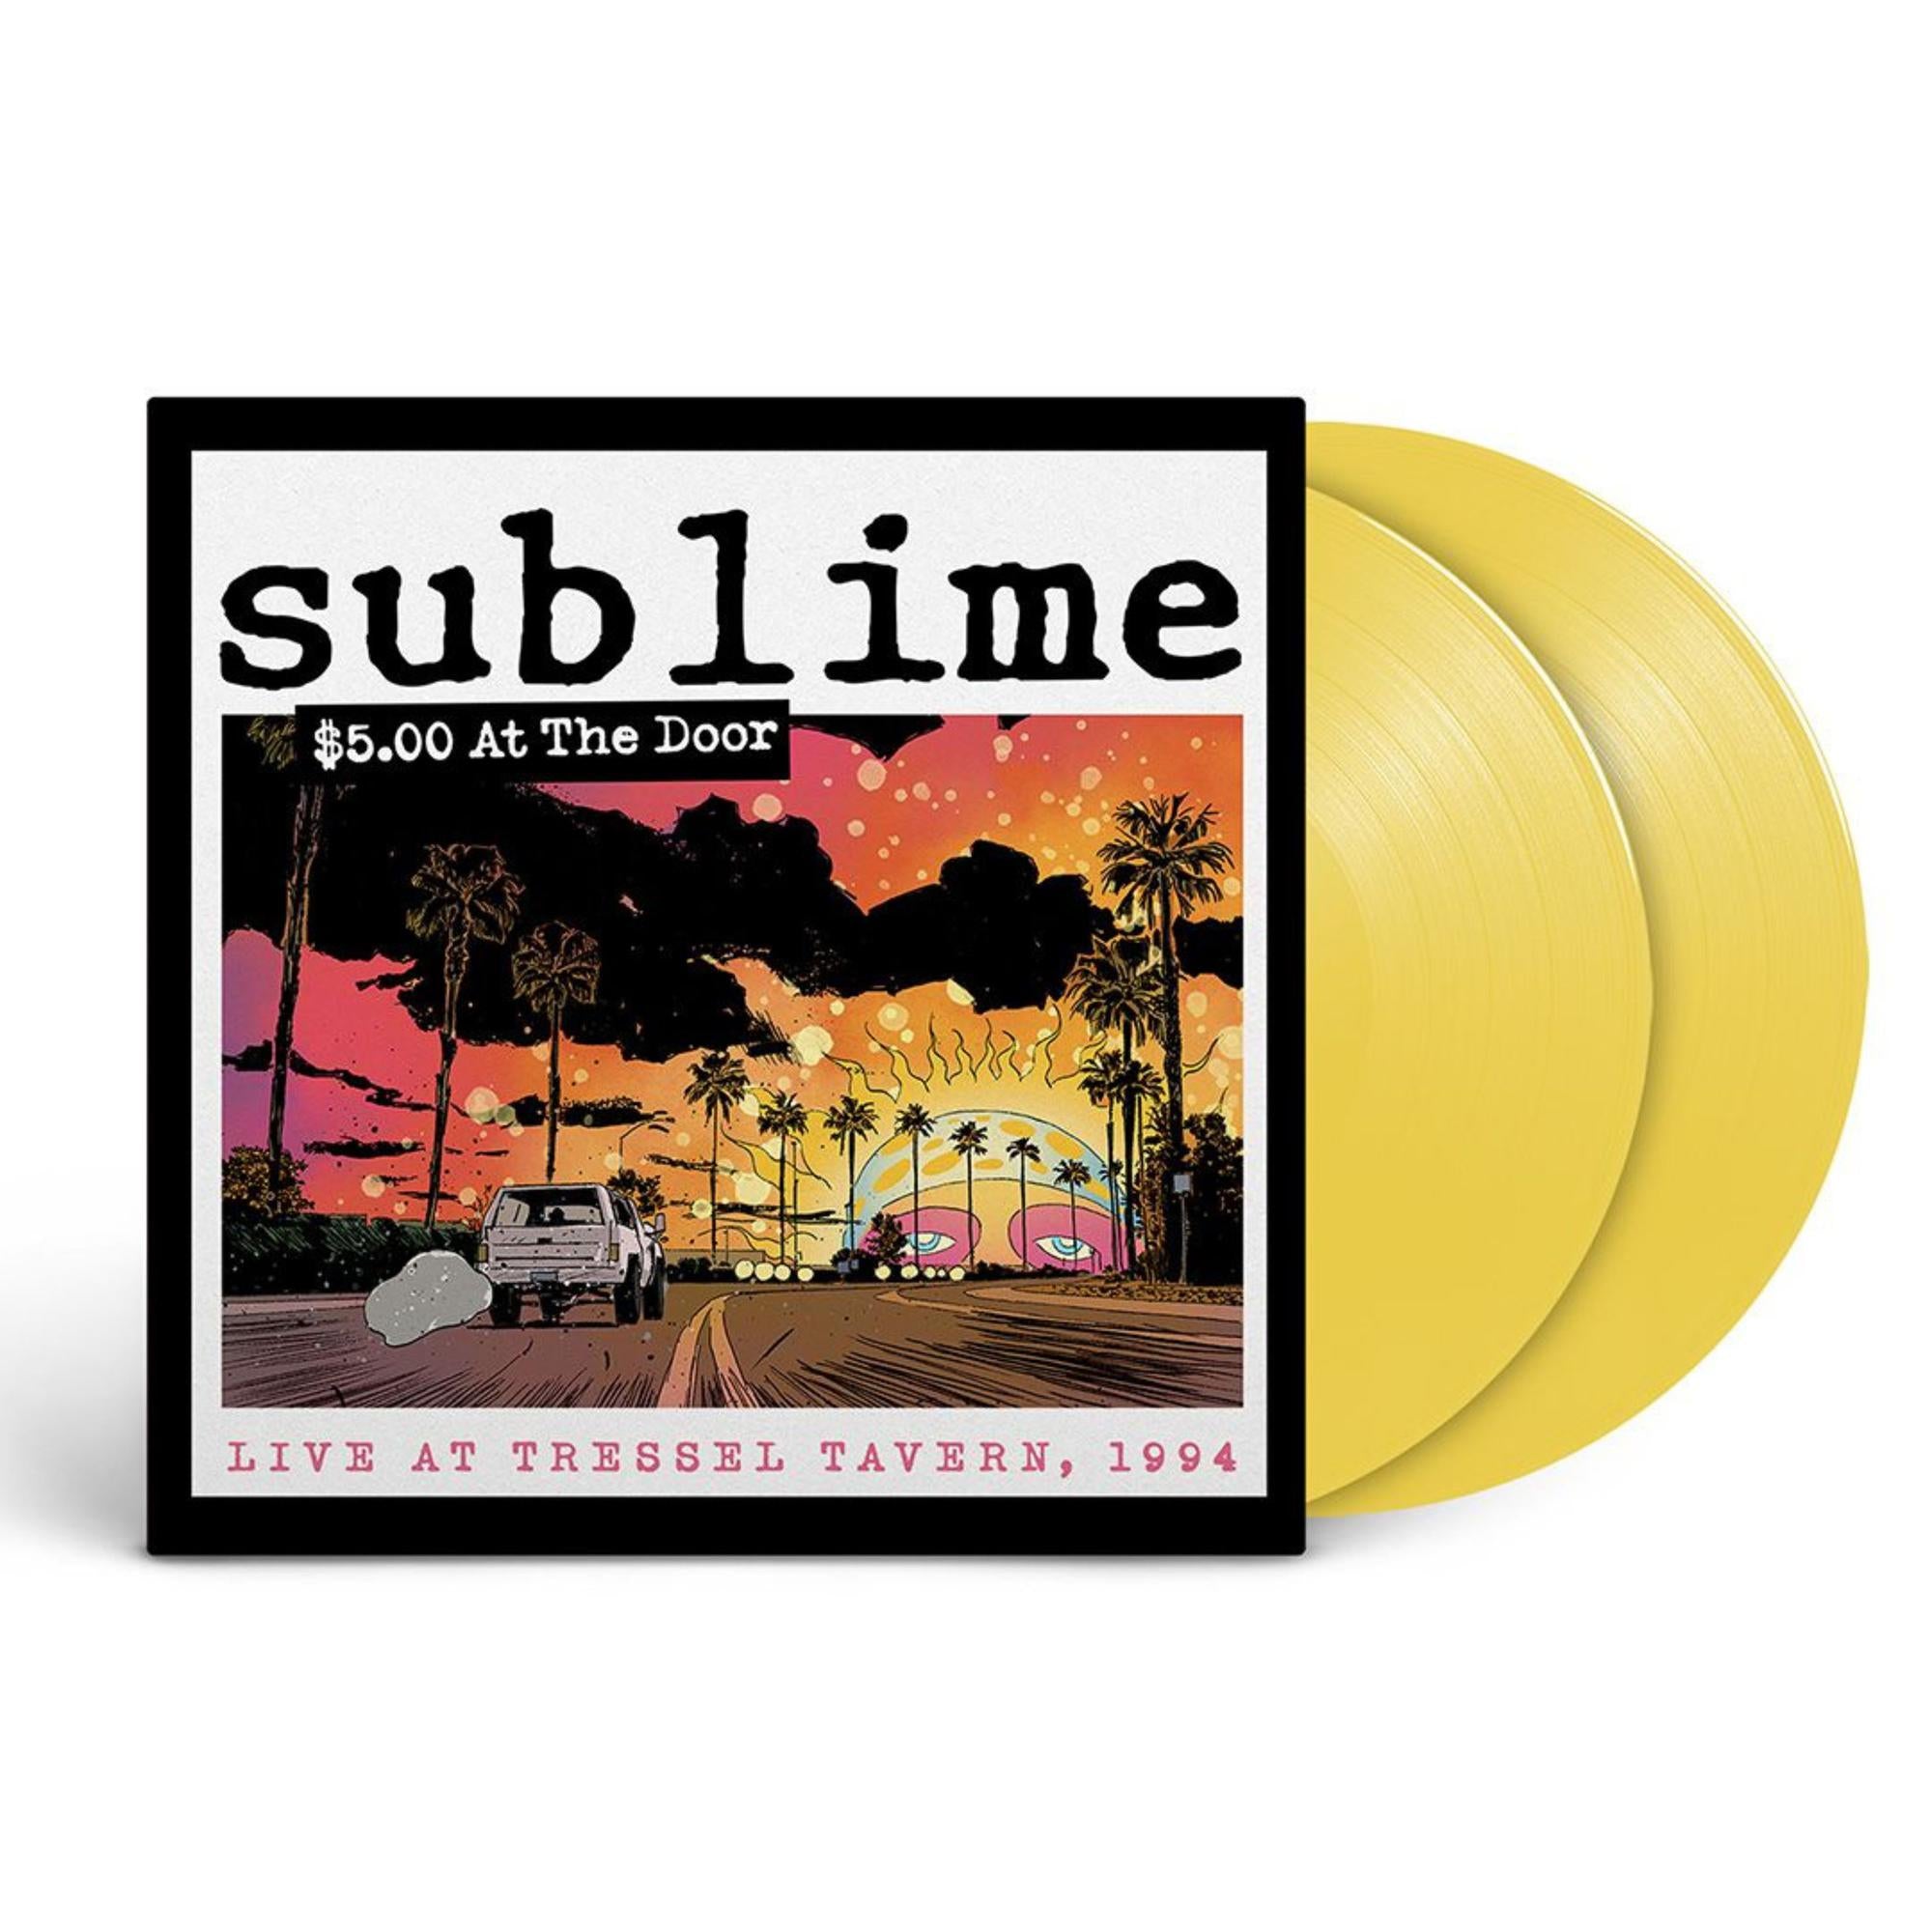 Sublime- $5 At The Door (Live At Tressel Tavern, 1994) (Indie Exclusive Yellow Vinyl) (PREORDER) - Darkside Records